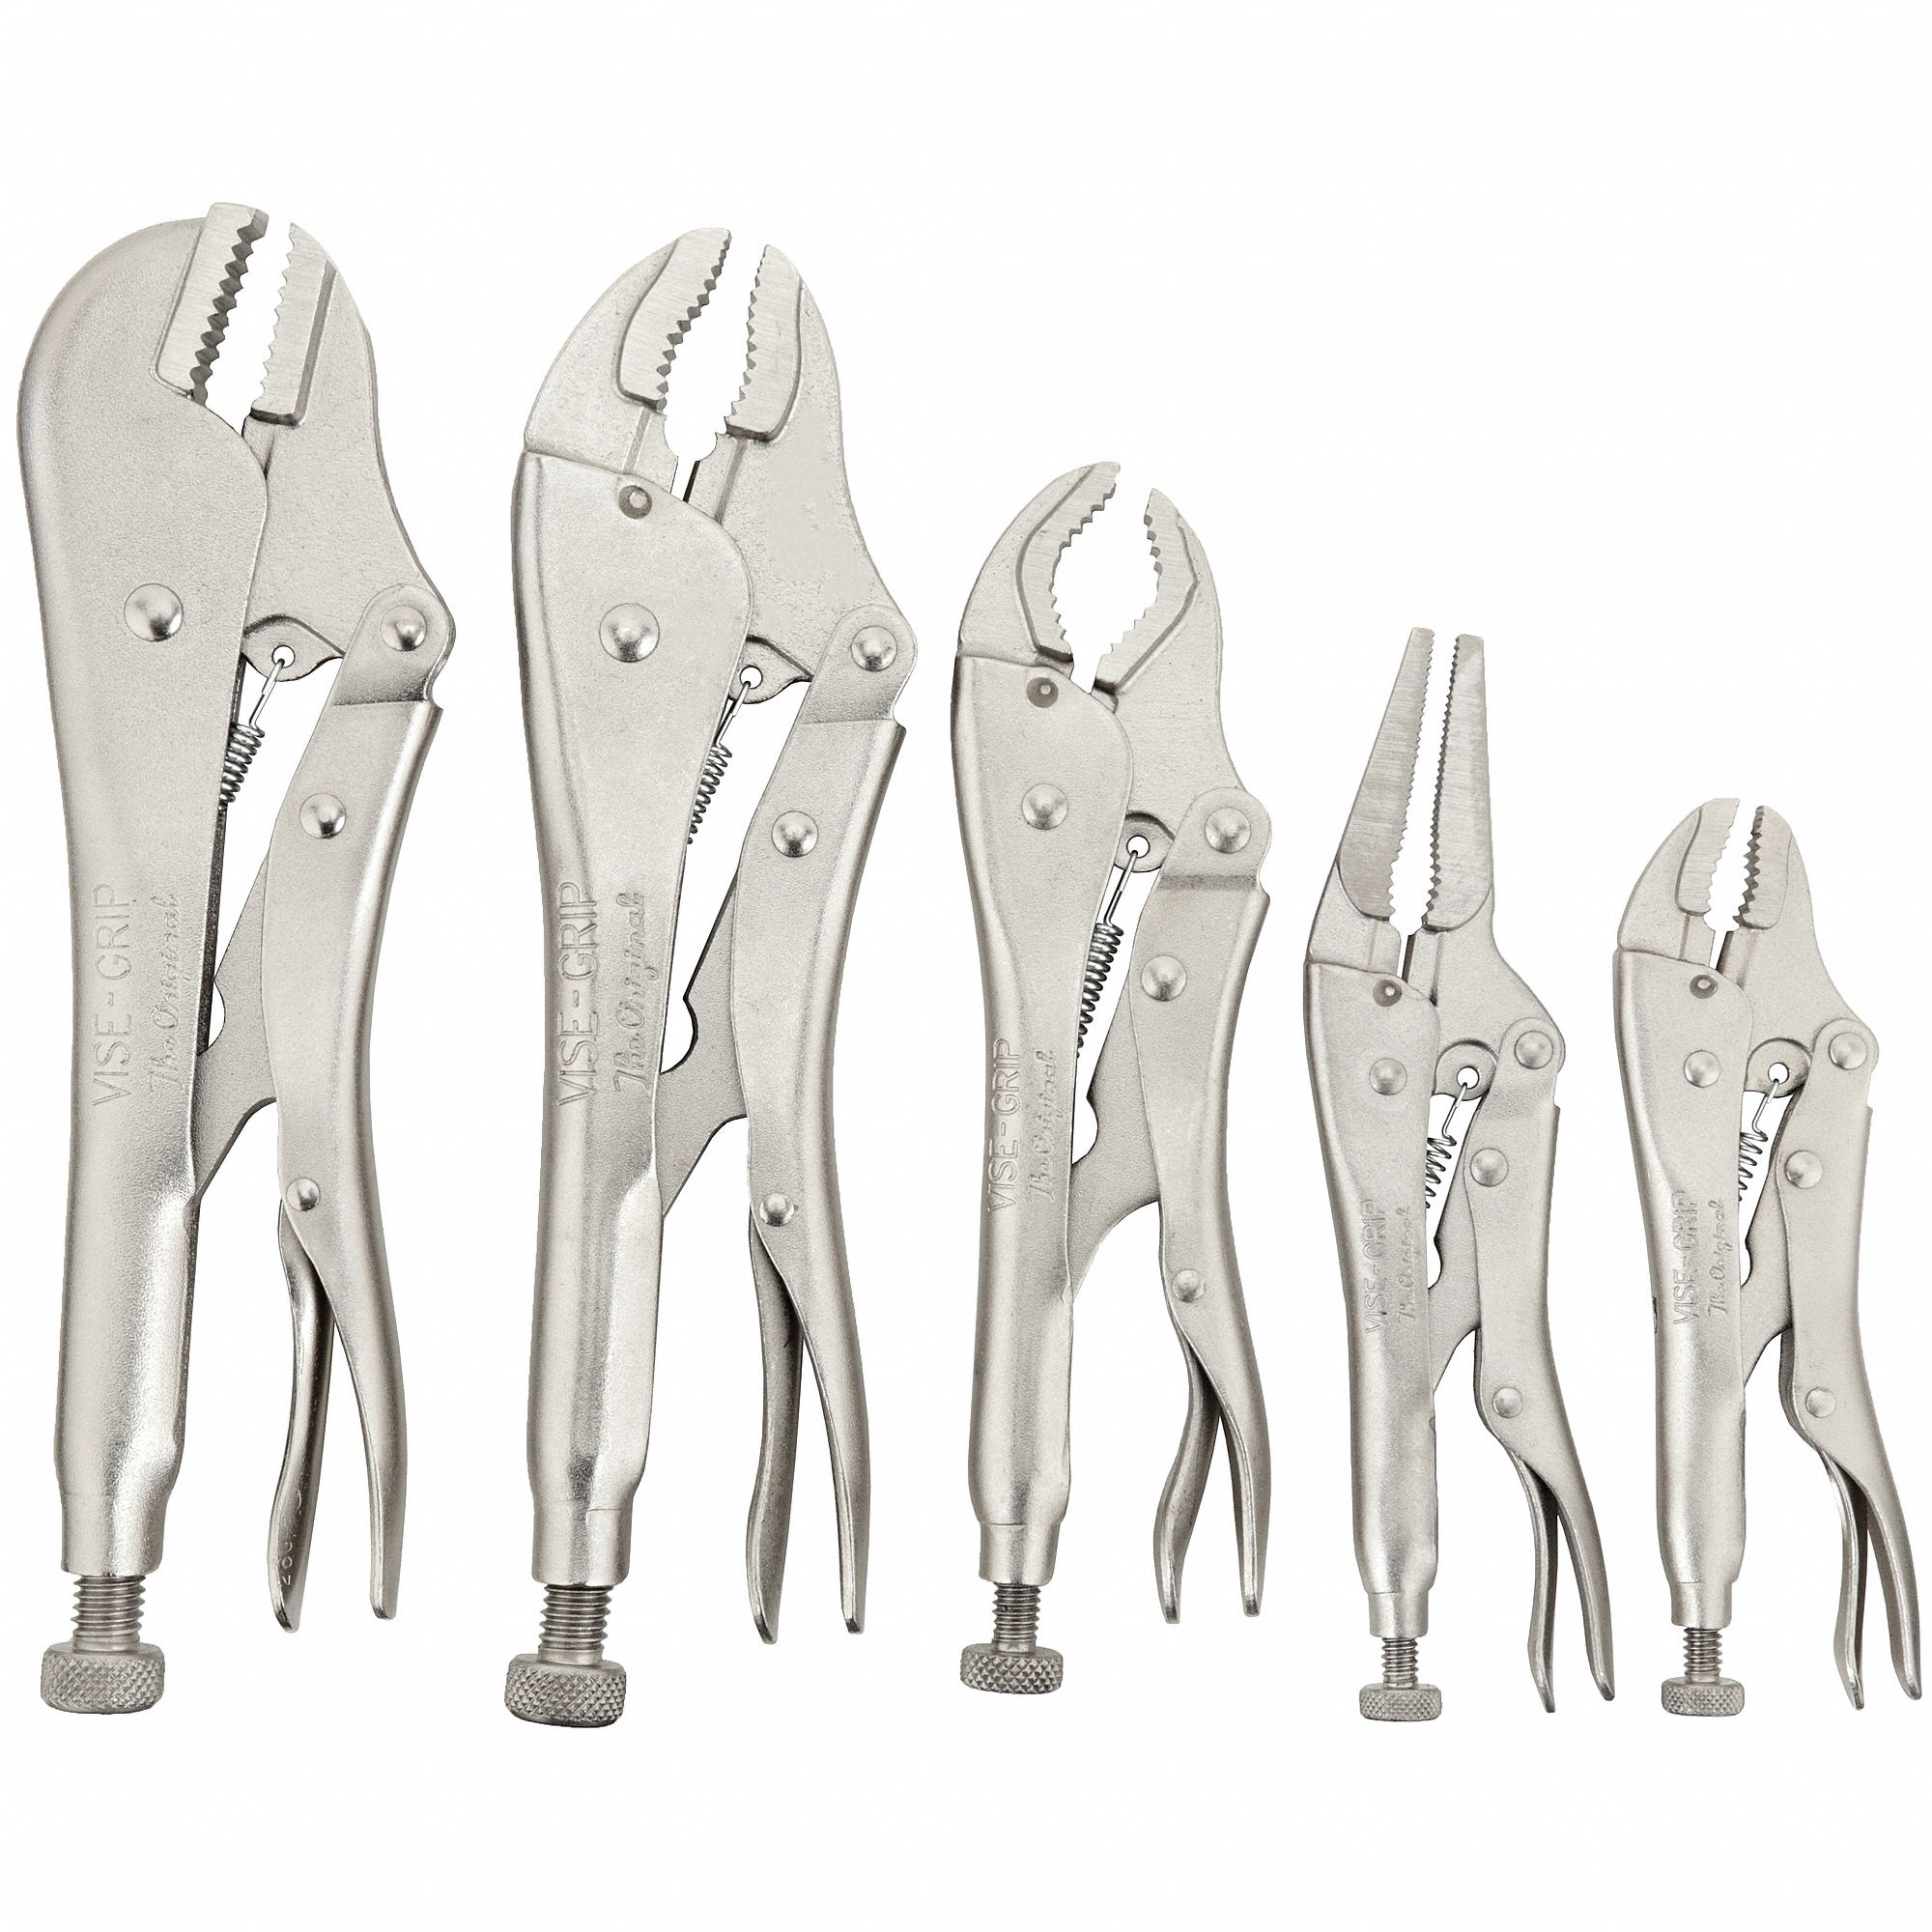 Curved, 1 1/8 in_1 1/2 in_1 7/8 in_2 in Max Jaw Opening, Locking Pliers Set  - 10J870